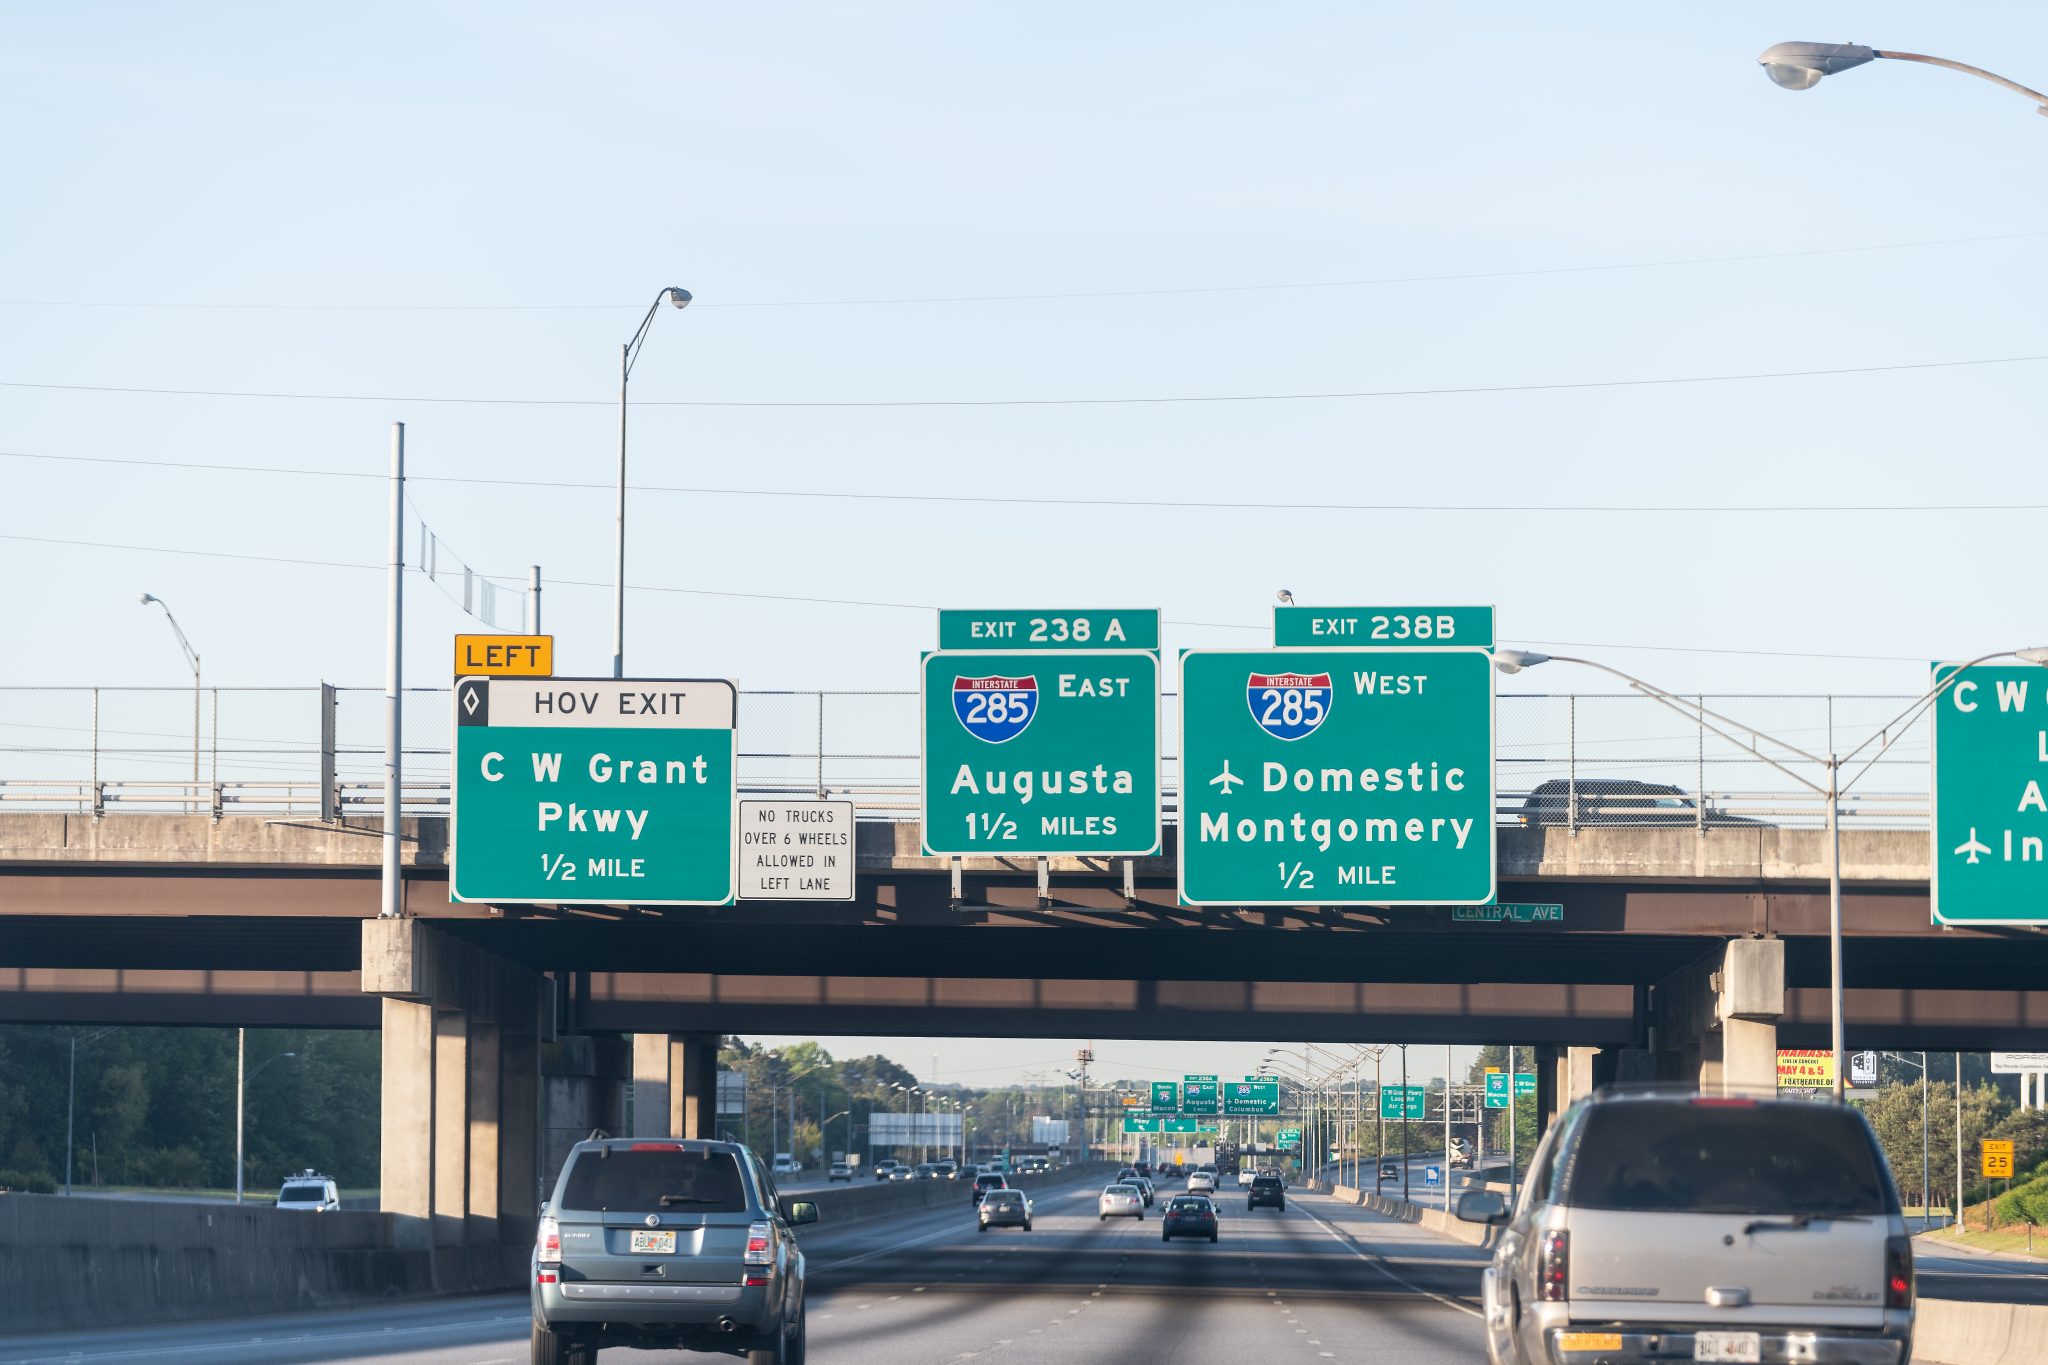 Did you know Highway I-285 in Atlanta is one of the most dangerous highways in the nation?